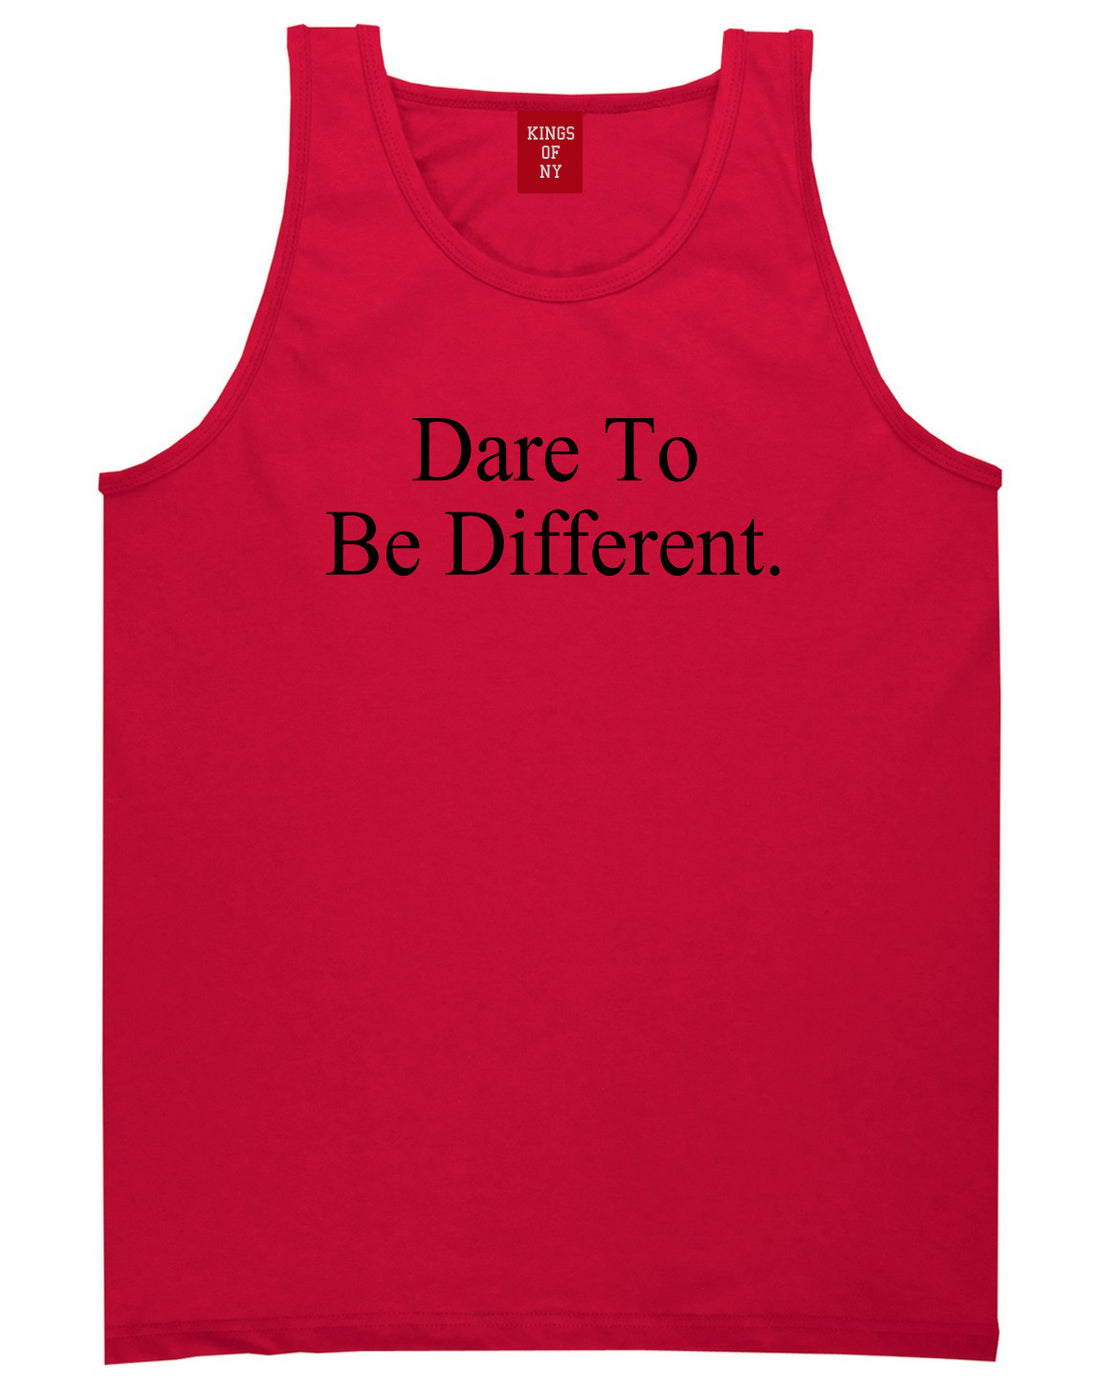 Dare_To_Be_Different Mens Red Tank Top Shirt by Kings Of NY